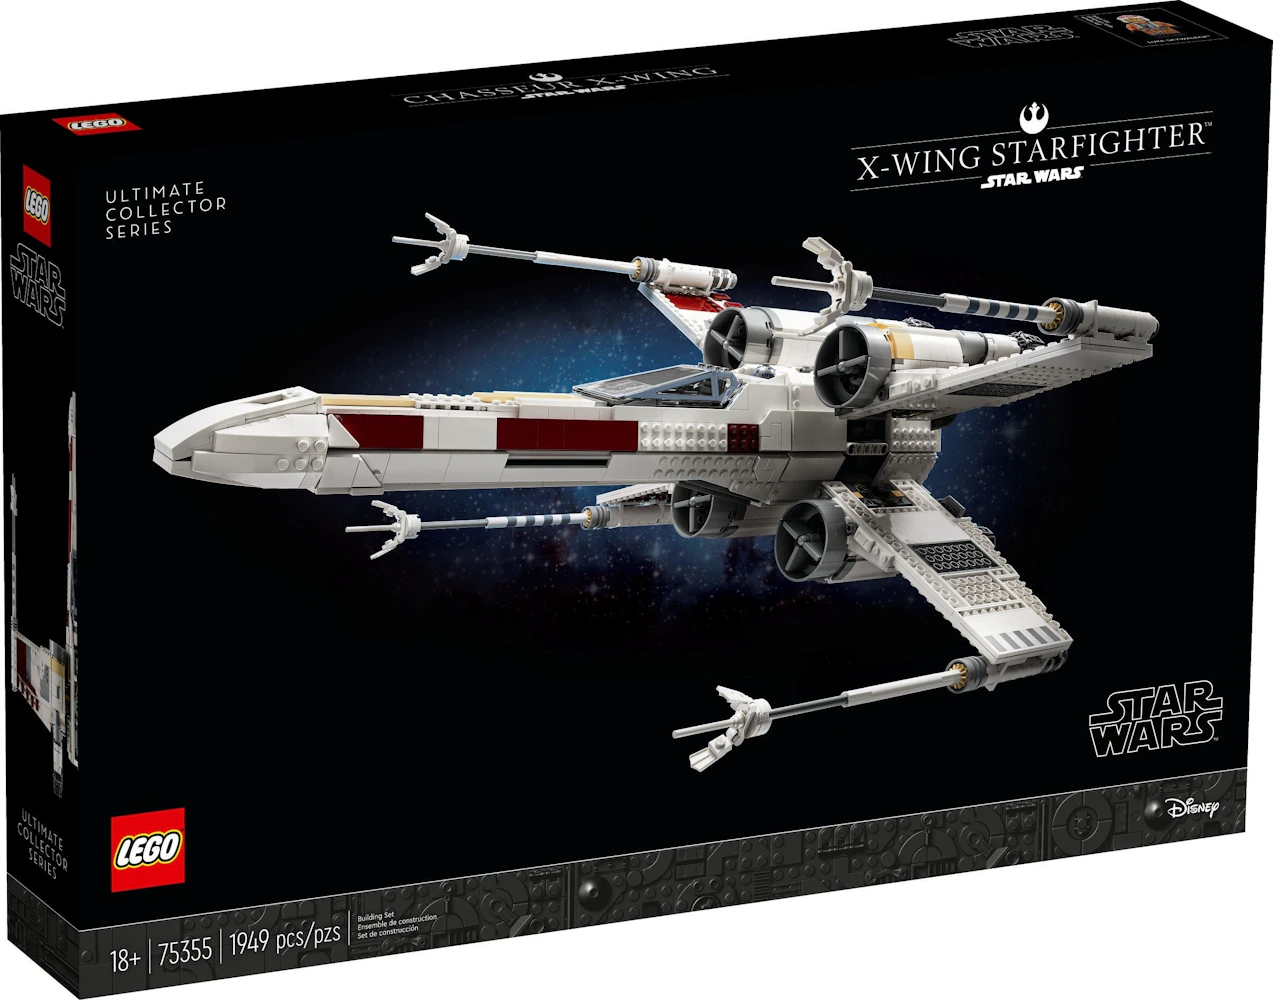 LEGO Star Wars Collector Series X-Wing Starfighter Set - US